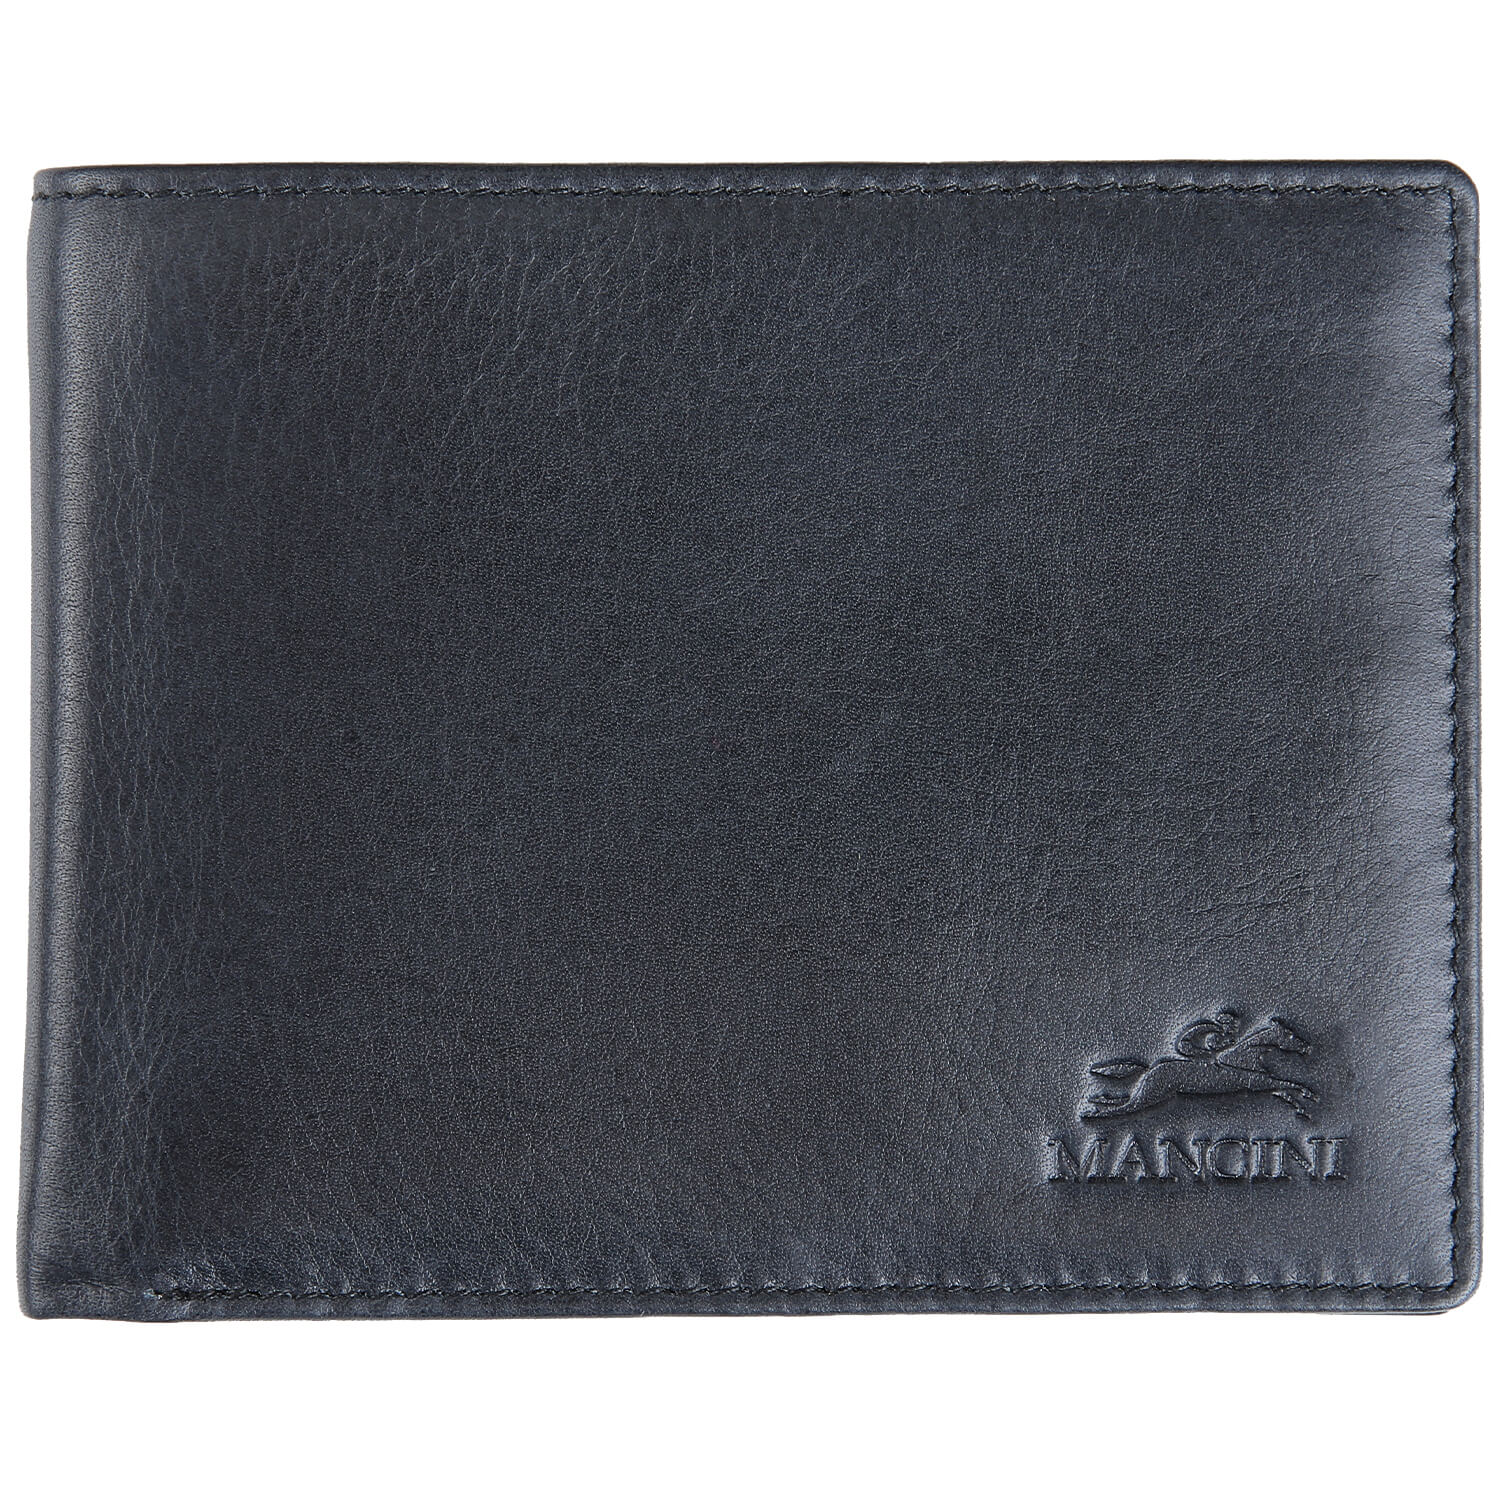 Center Wing RFID Wallet with Coin Pocket